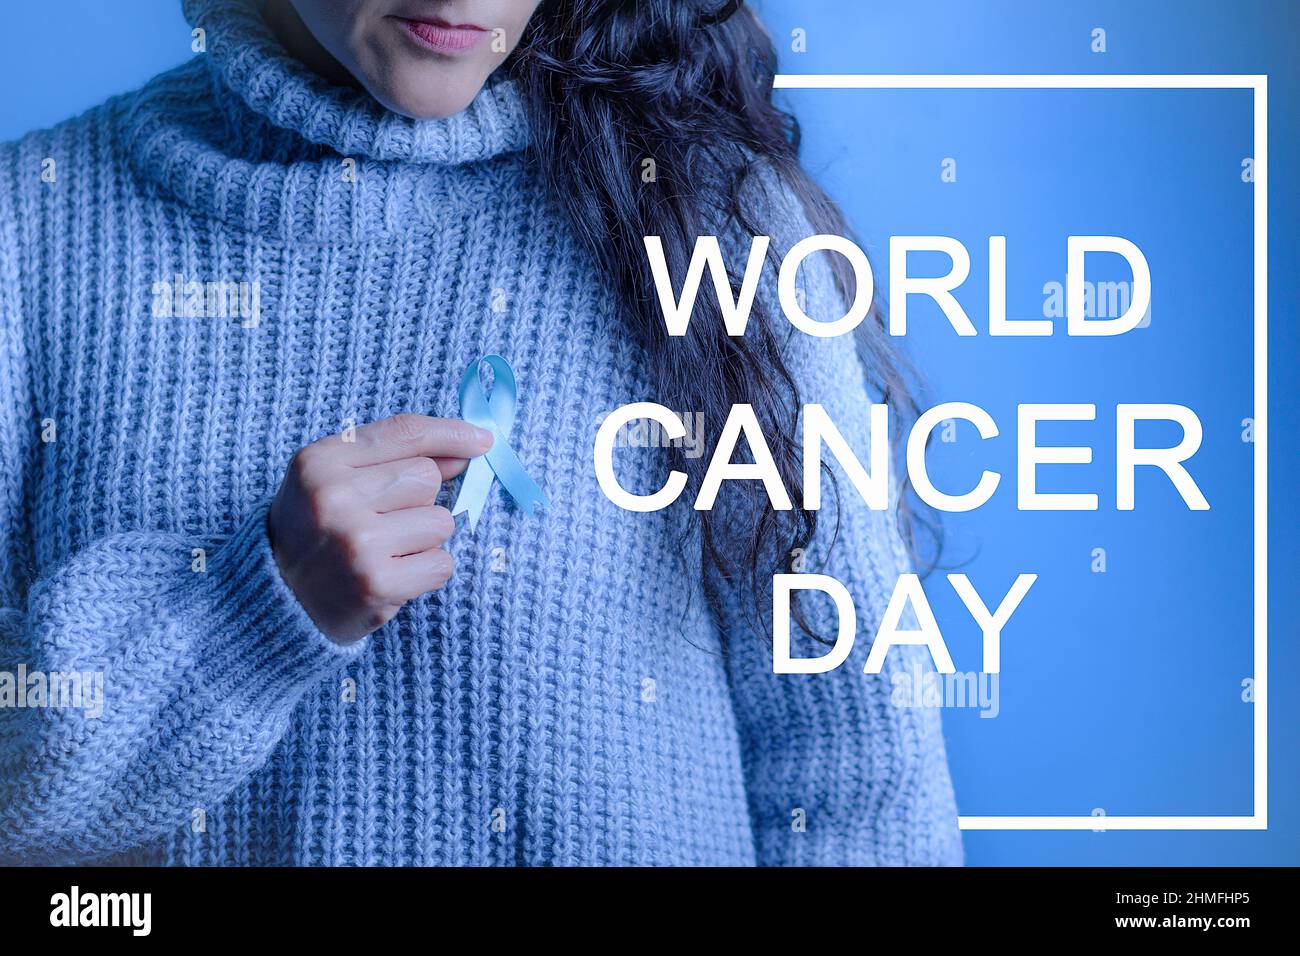 November Prostate Cancer Awareness Month, A Woman's Hands Holding Blue Ribbon in Support of People with Cancer. Prostate cancer and health awareness c Stock Photo